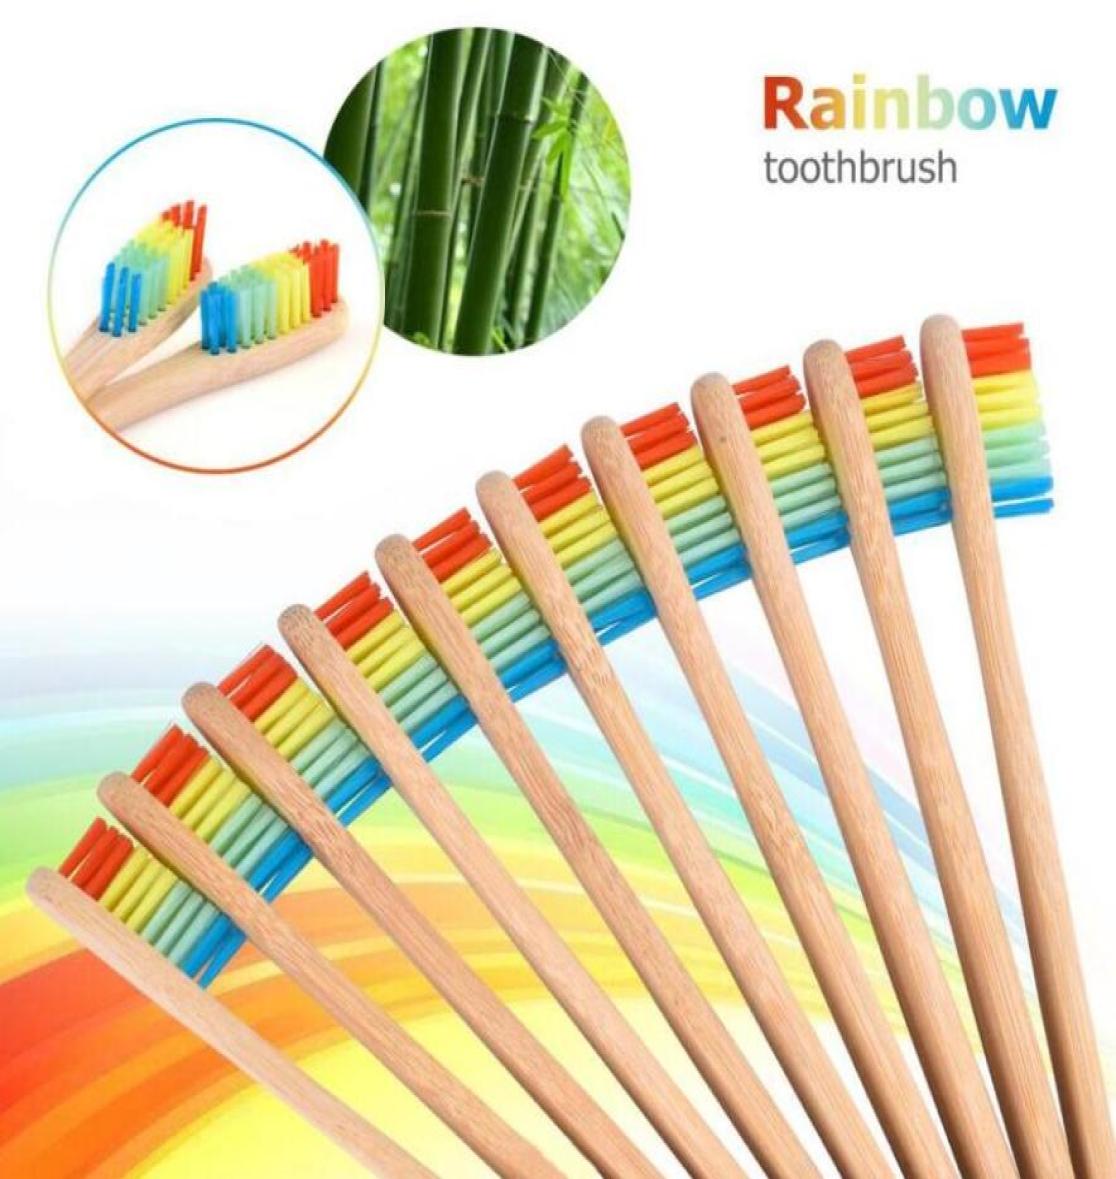 

Natural Wooden Bamboo Tooth Brush Nano Eco Friendly Toothbrushes Colorful Softbristle Dental Brush Travel Charcoal Toothbrush3577289